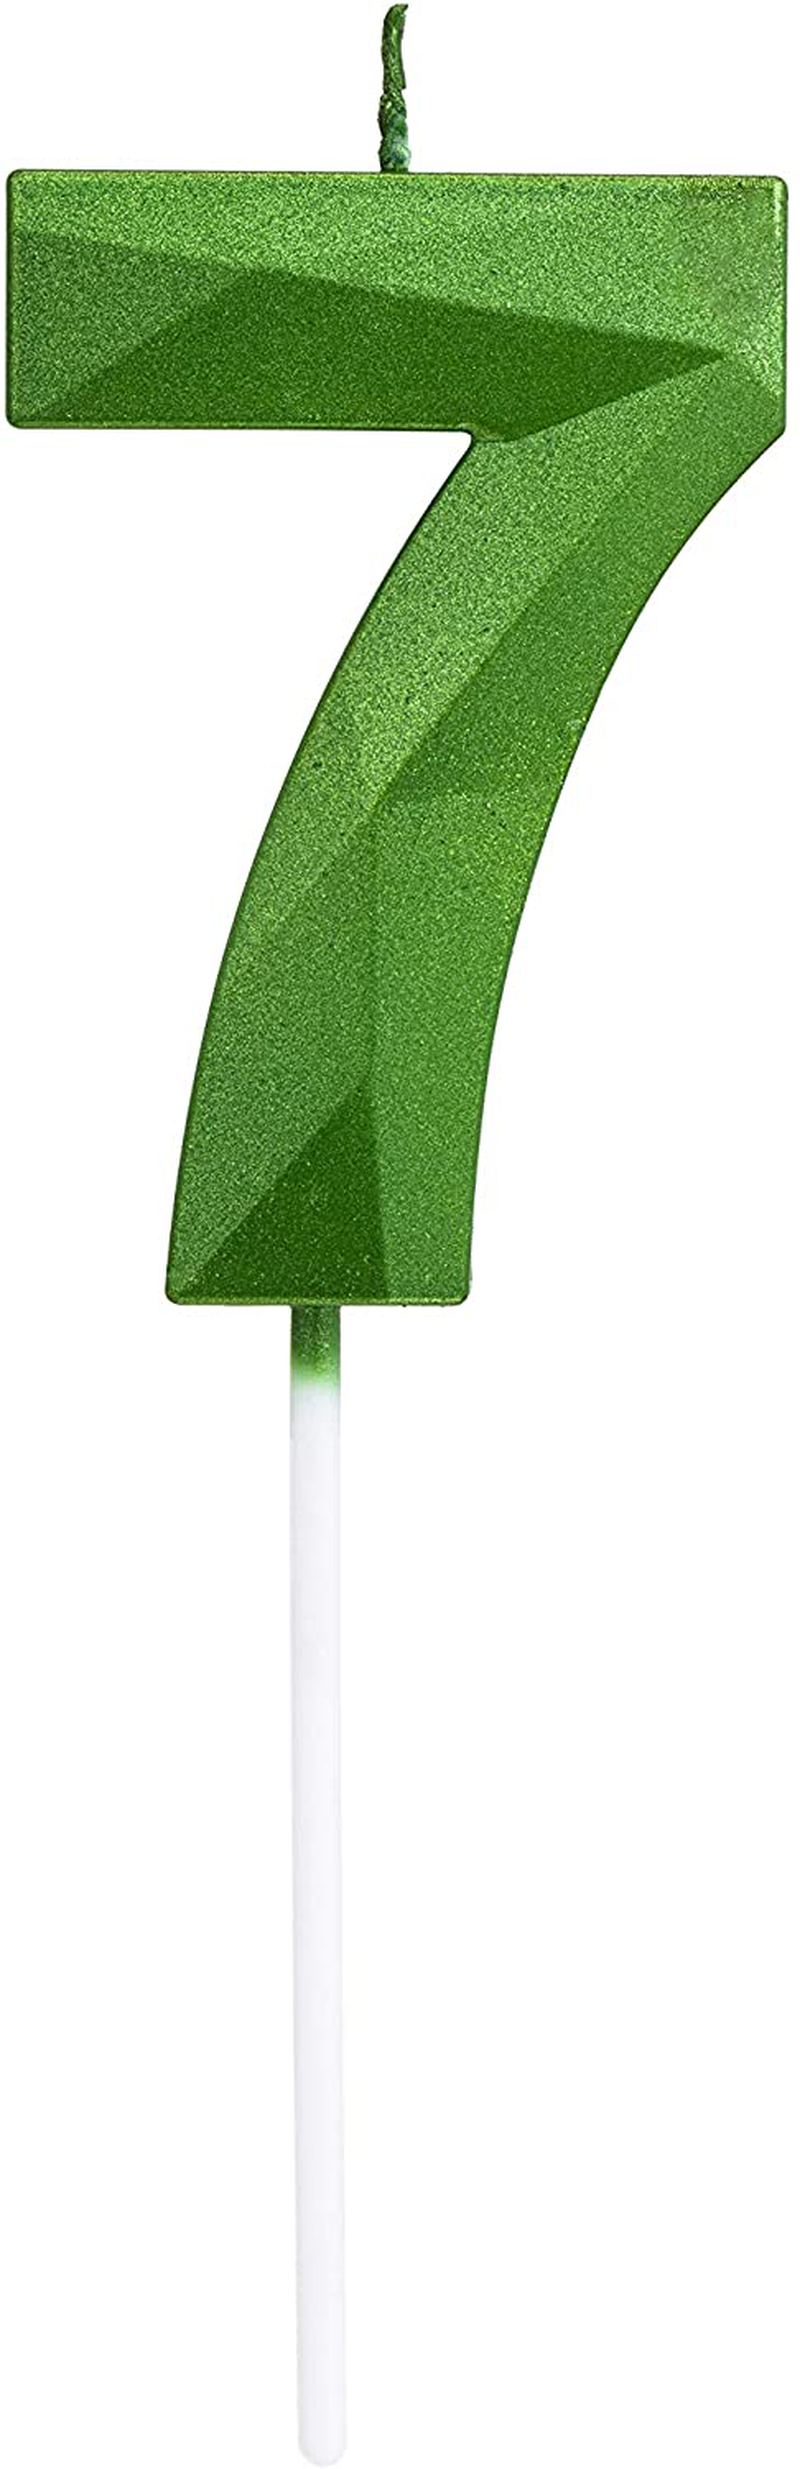 Green Happy Birthday Cake Candles,Wedding Cake Number Candles,3D Design Cake Topper Decoration for Party Kids Adults (Green Number 6) Home & Garden > Decor > Seasonal & Holiday Decorations& Garden > Decor > Seasonal & Holiday Decorations MEIMEI Green number 7 